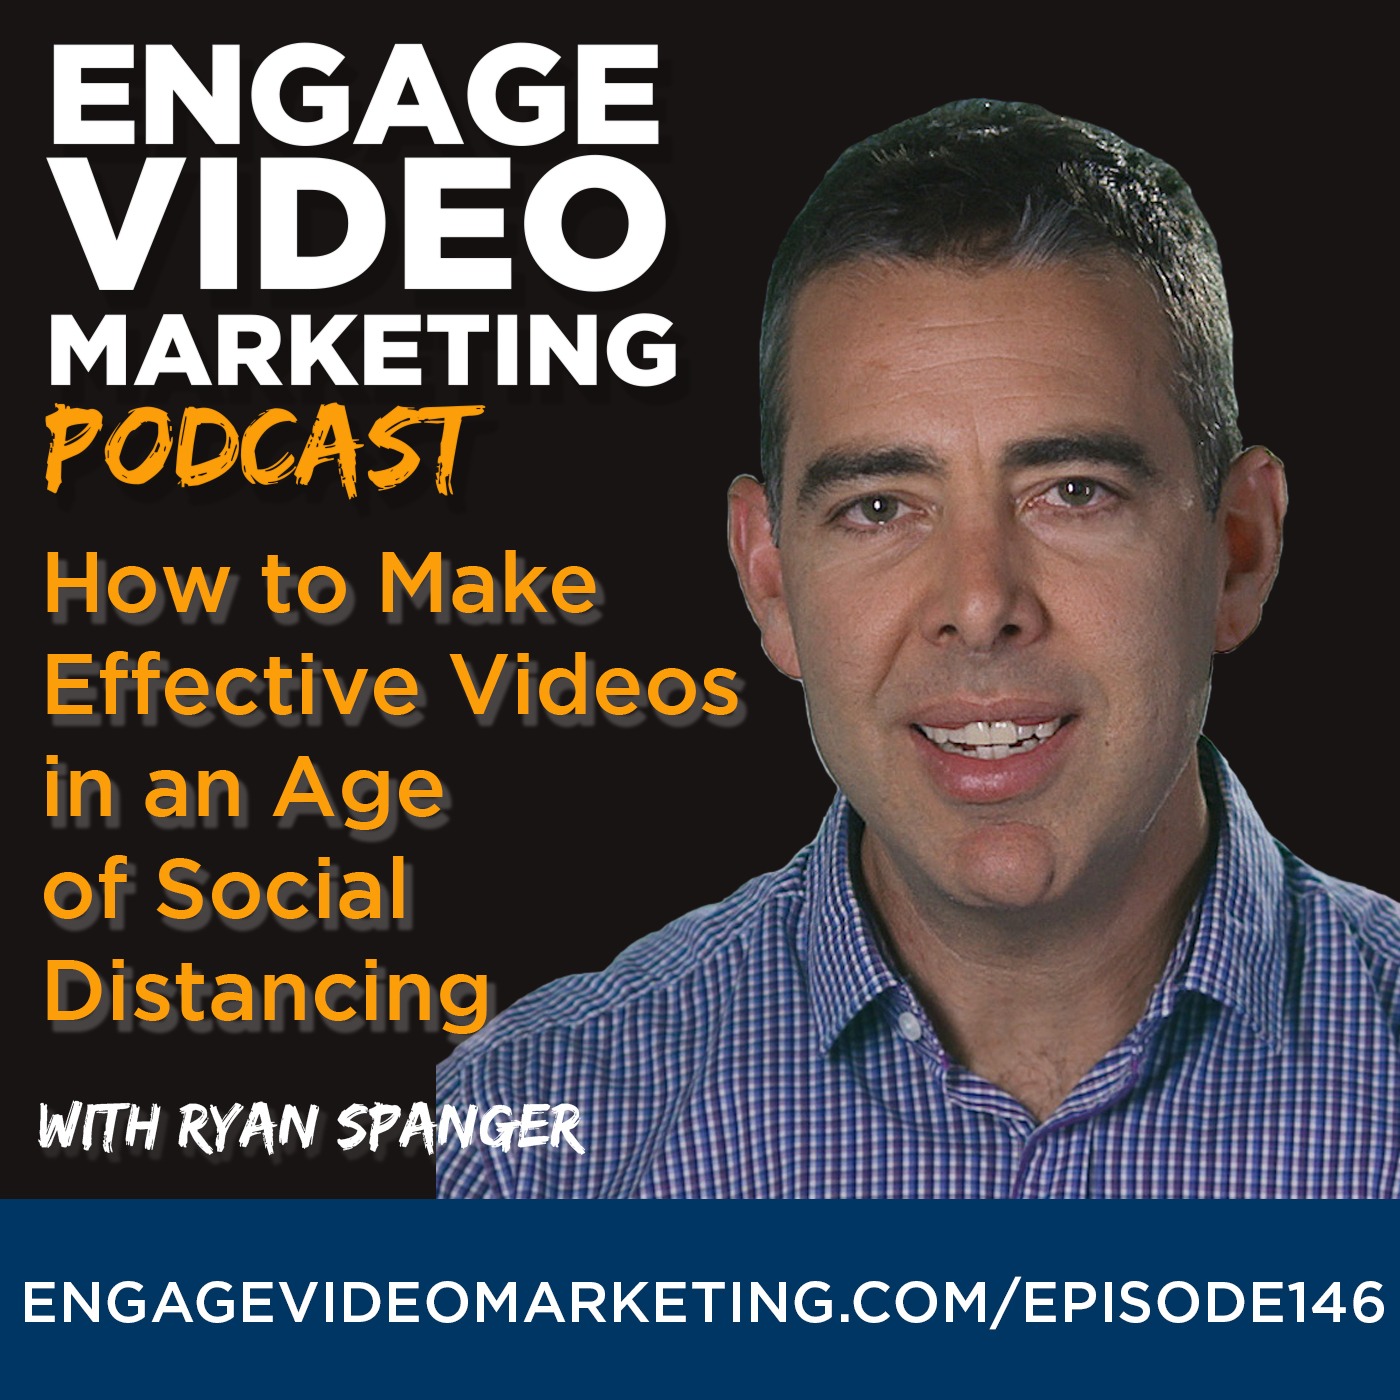 How to Make Effective Videos in an Age of Social Distancing with Ryan Spanger